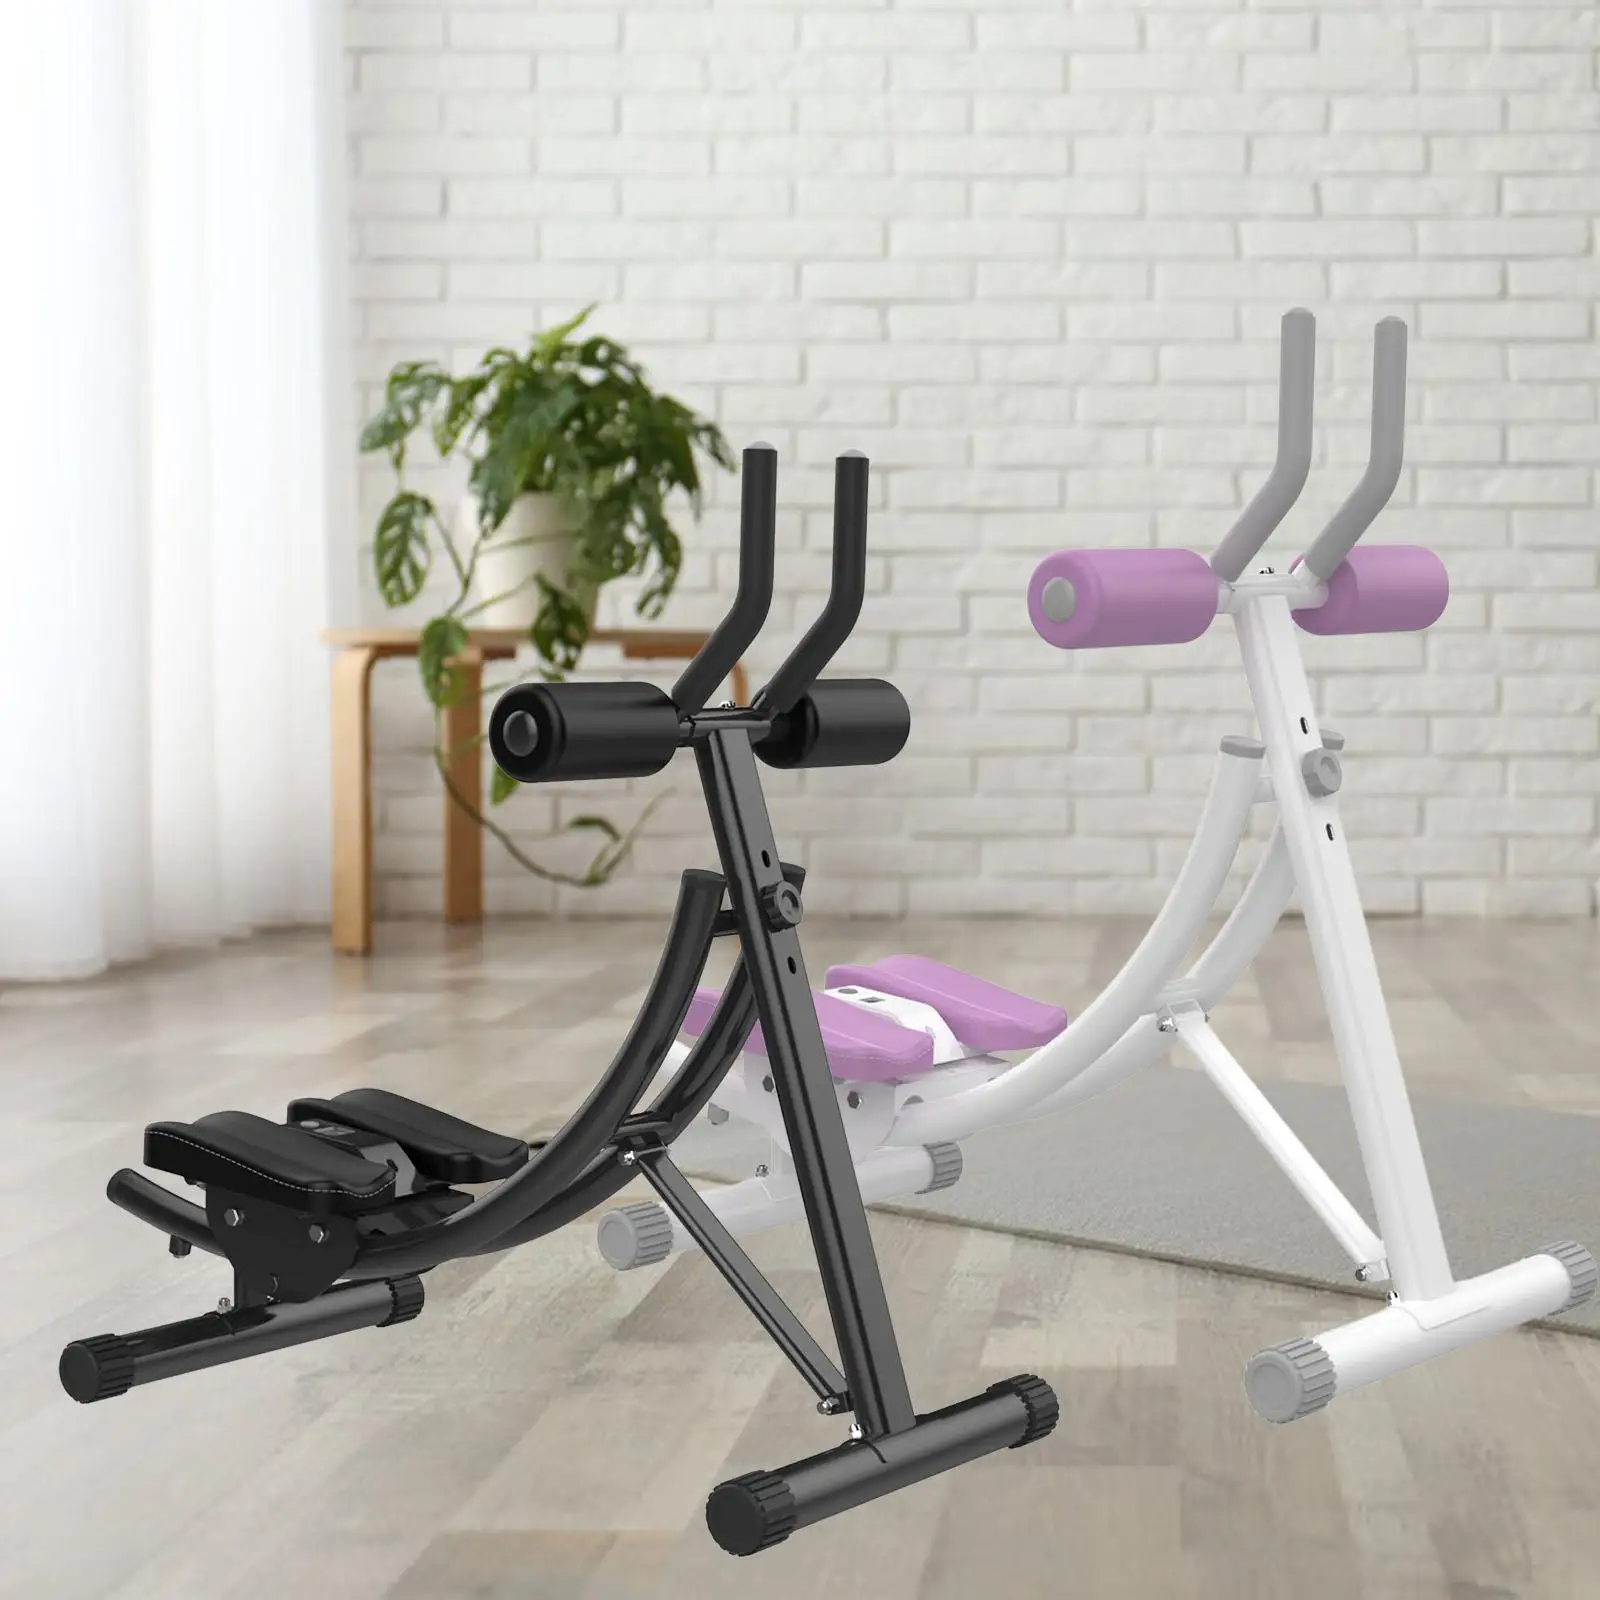 Foldable ABS Trainer Household Digital Display Fitness Equipment Strength